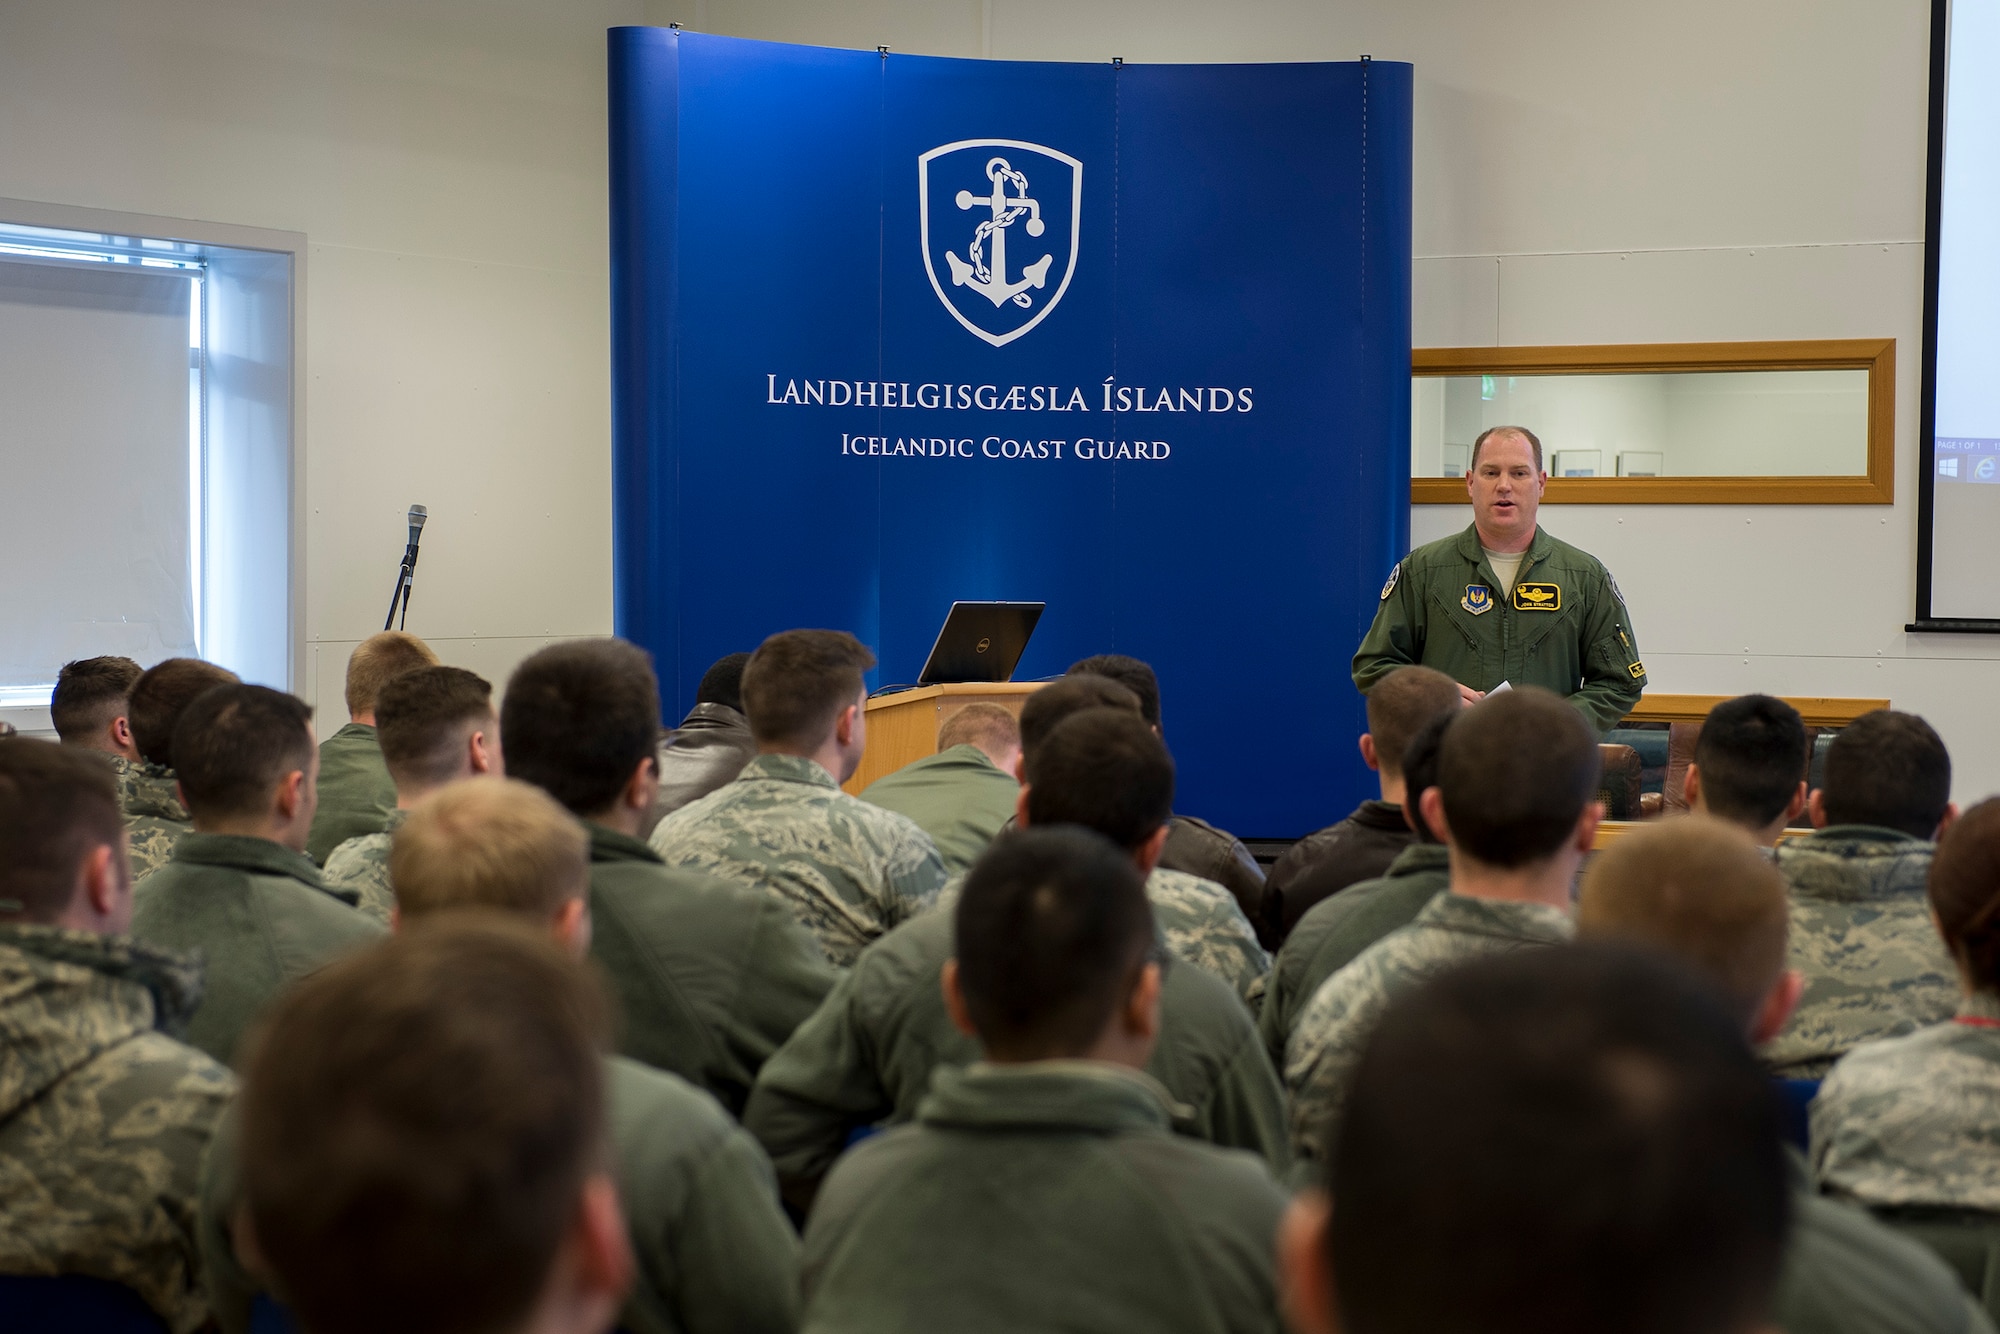 U.S. Air Force Lt. Col. John Stratton, 871st Air Expeditionary Squadron commander, speaks to deployed personnel at Keflavik, Iceland, in support of Icelandic Air Surveillance and Policing operations April 13, 2015. Four F-15C Eagle fighter aircraft from Royal Air Force Lakenheath, a KC-135 Stratotanker from RAF Mildenhall and approximately 200 U.S Airmen are deployed in support of IAS 2015 to ensure the safety and security of Icelandic airspace. (U.S. Air Force photo by Staff Sgt. Chad Warren/Released)